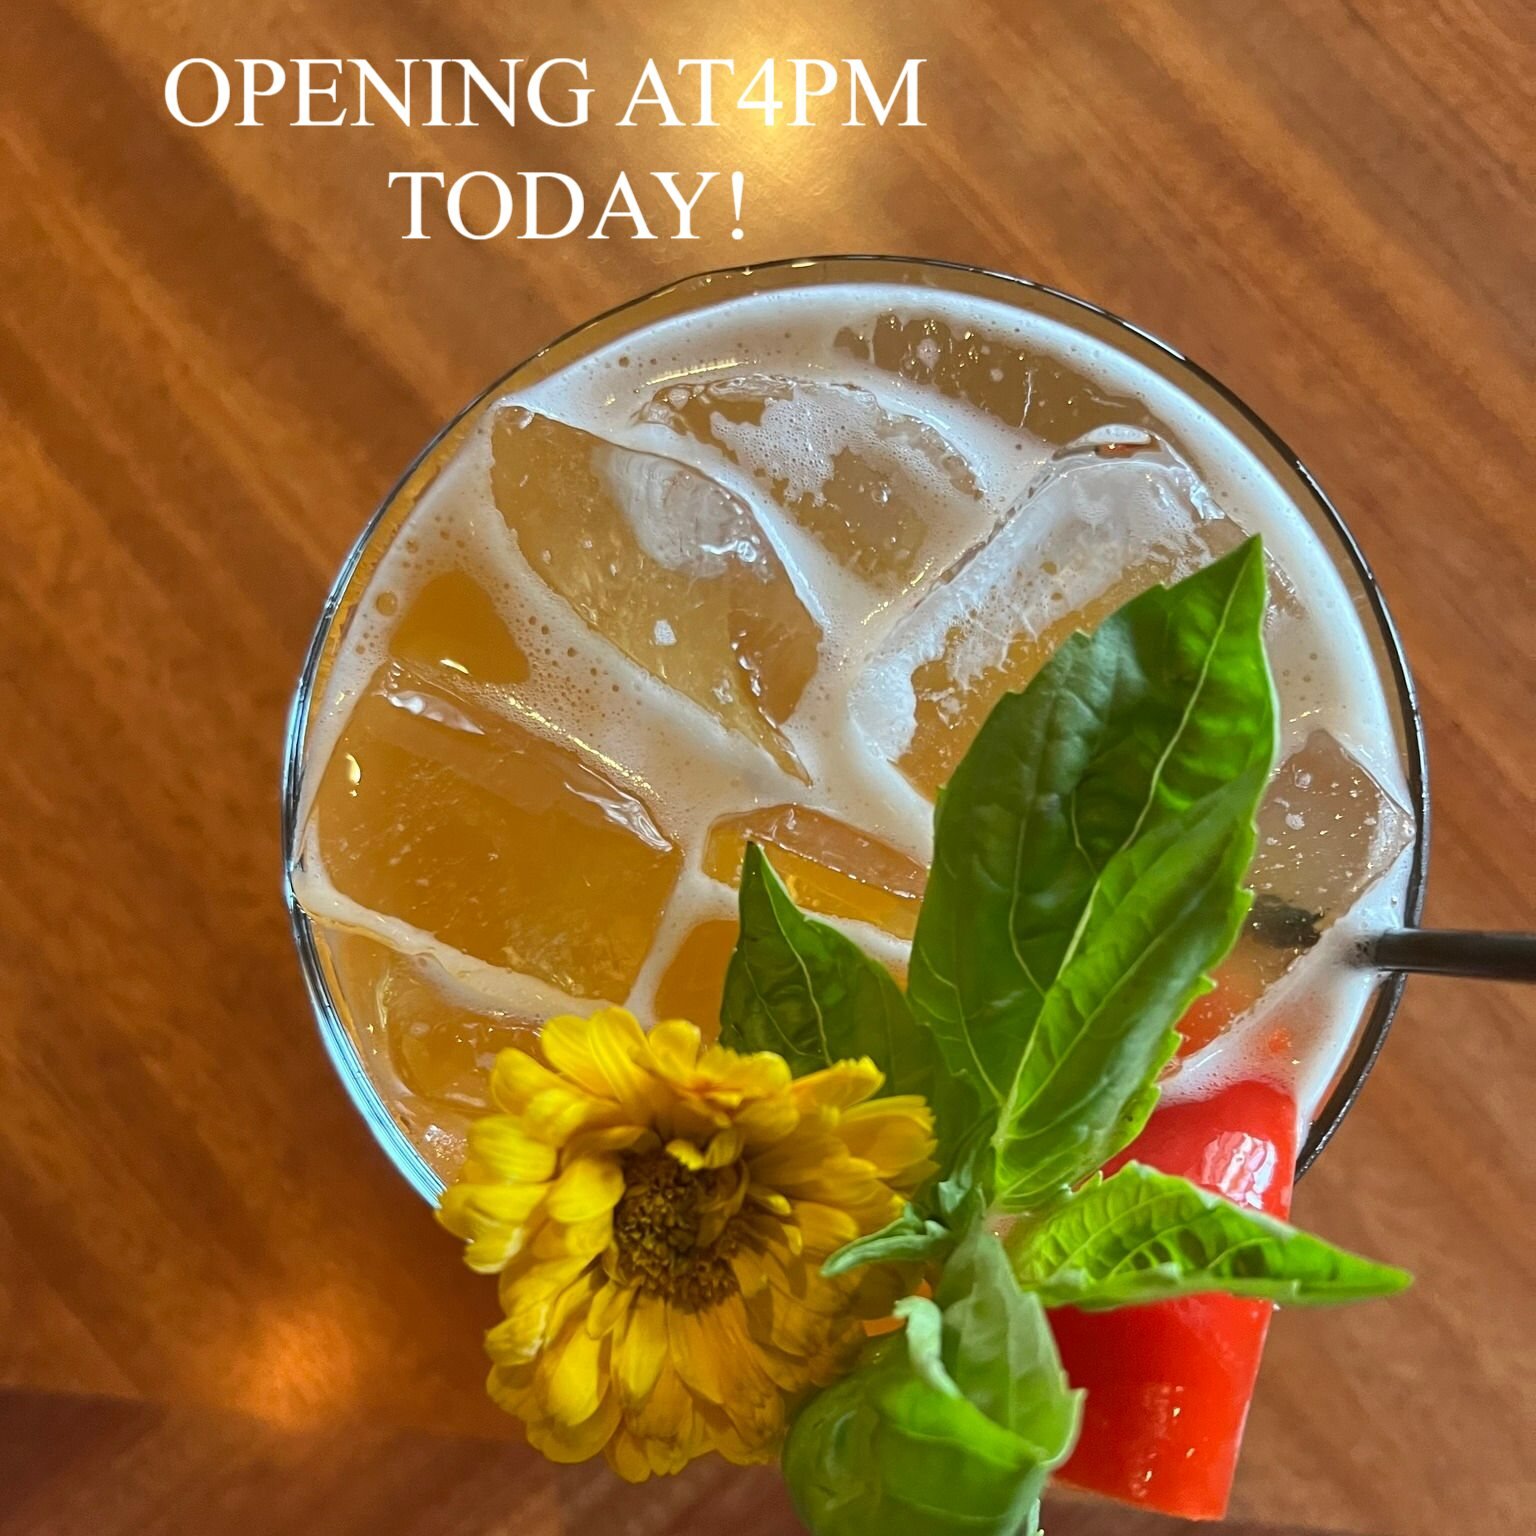 4PM OPENING TODAY........JUST IN TIME FOR HAPPY HOUR! 

🍷 Happy Hour 4pm-7pm
📍630 King Street / Charleston SC 29403
🕐 4pm-10pm
🍴 Book your reservations with @resy